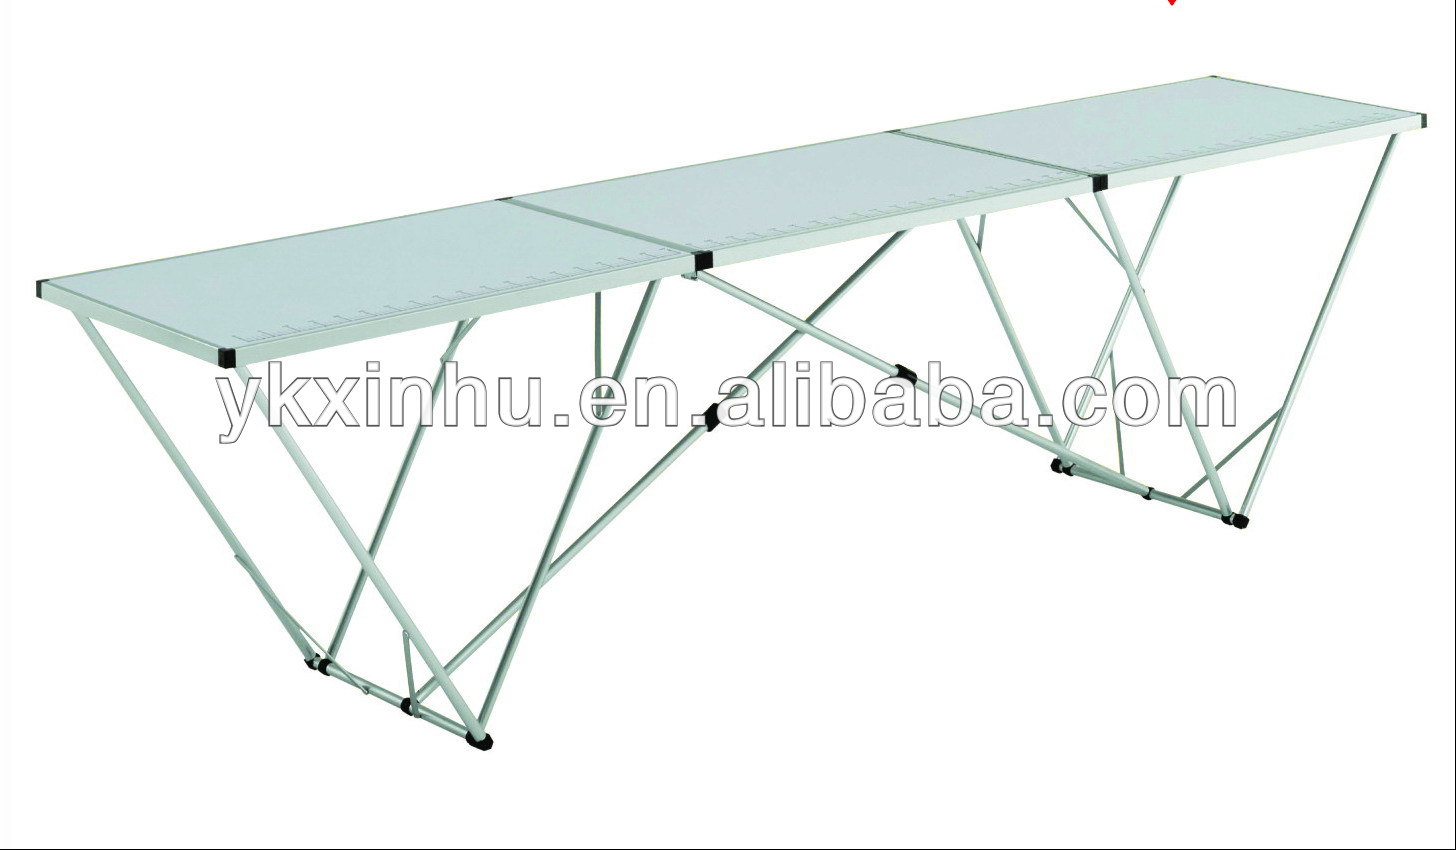 wallpaper pasting table View wallpaper work table XINHU Product